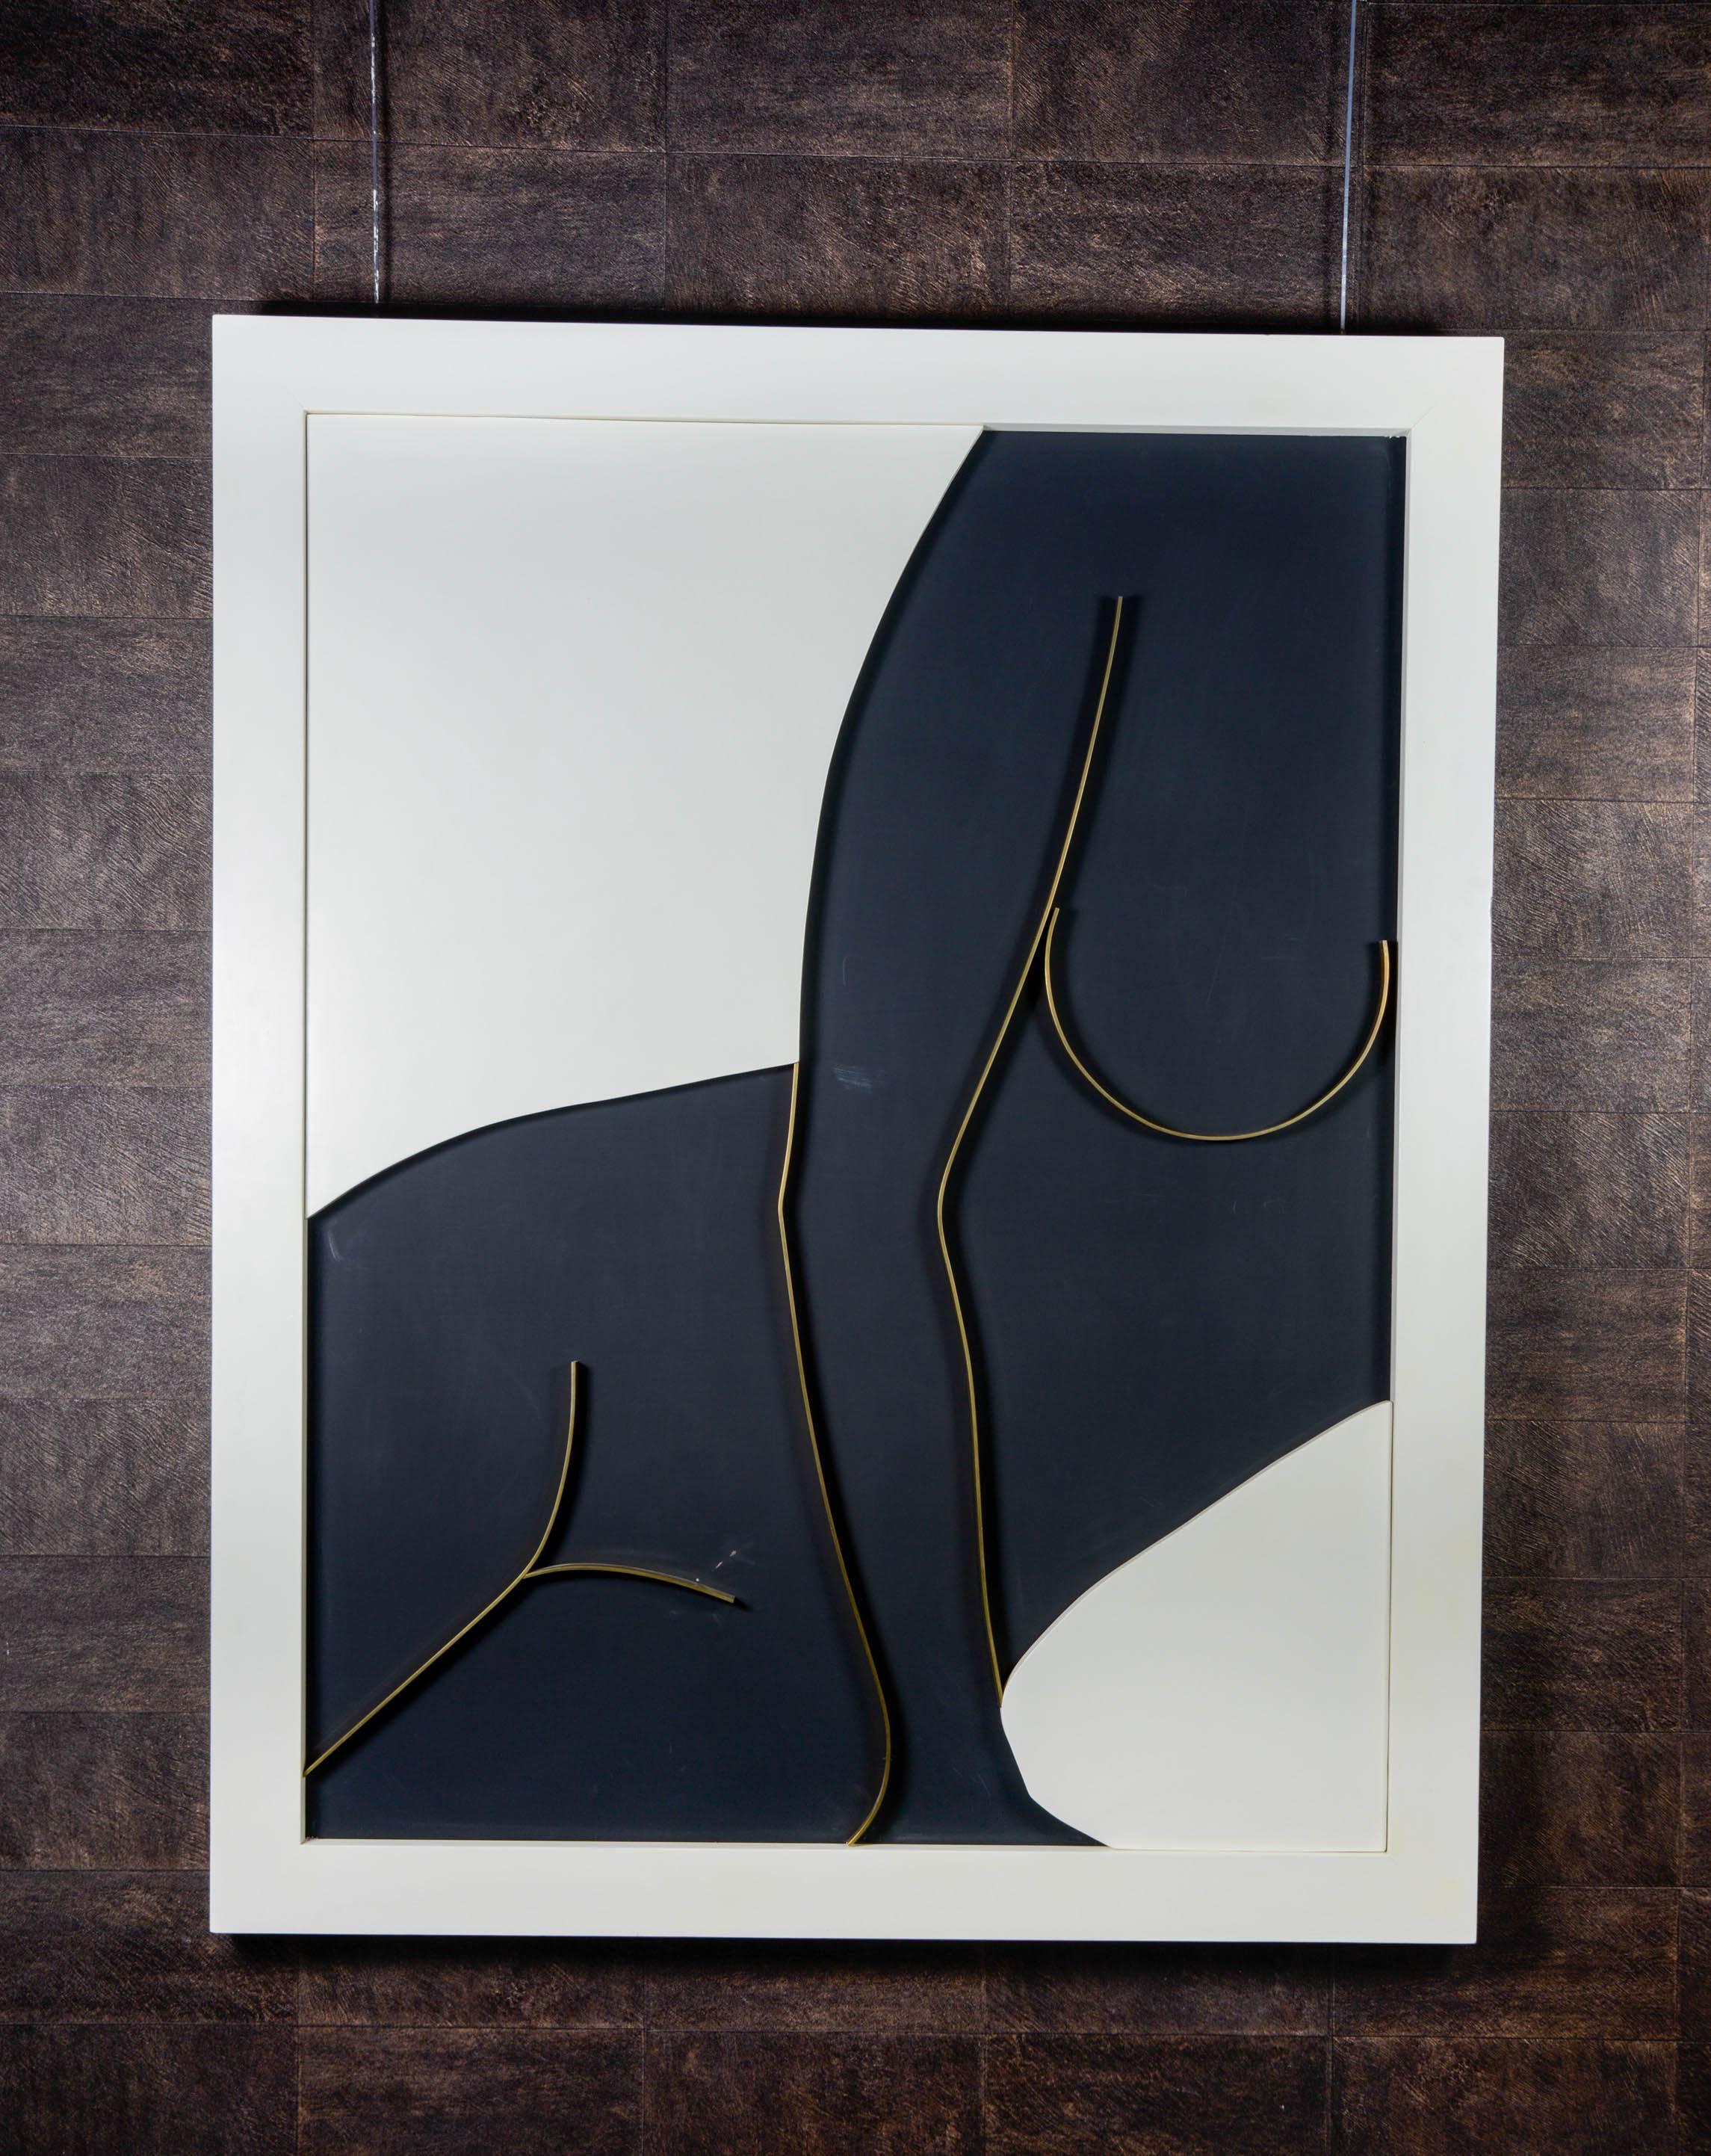 Oil painting on canvas with brass profiles and frame lacquered in white.

This painting is part of the famous 